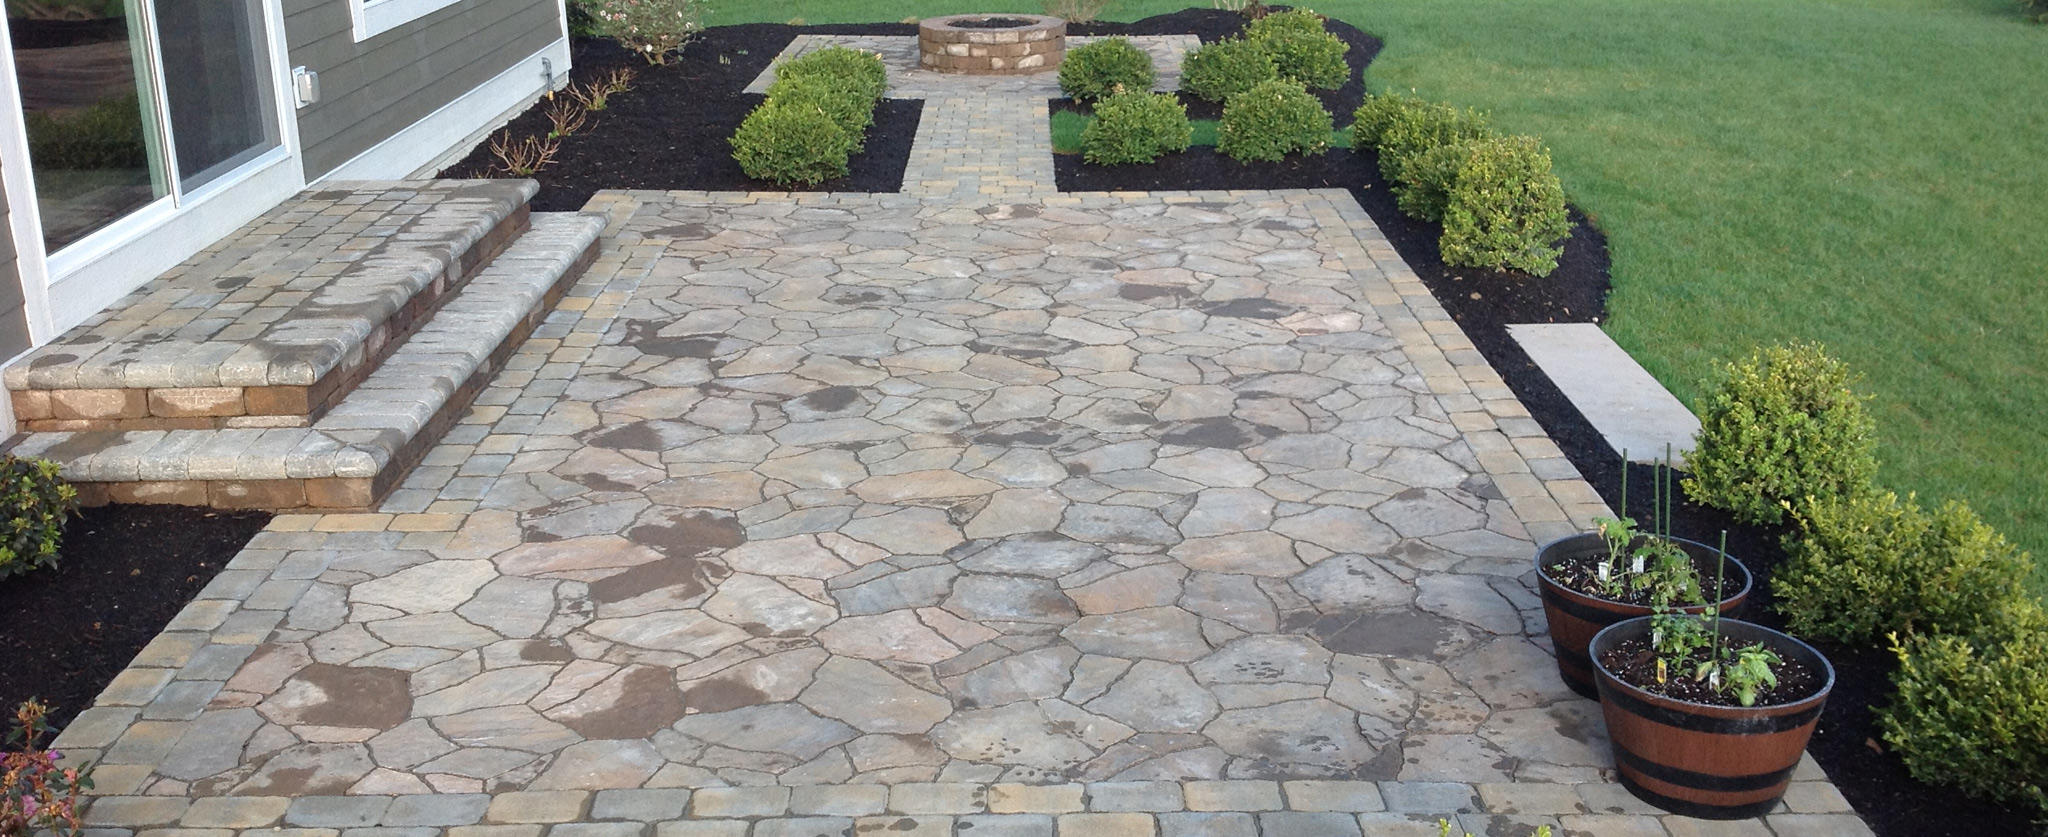 For more than 40 years, we've been beautifying residential and commercial outdoor spaces with our expert service for landscaping in Dublin, OH.